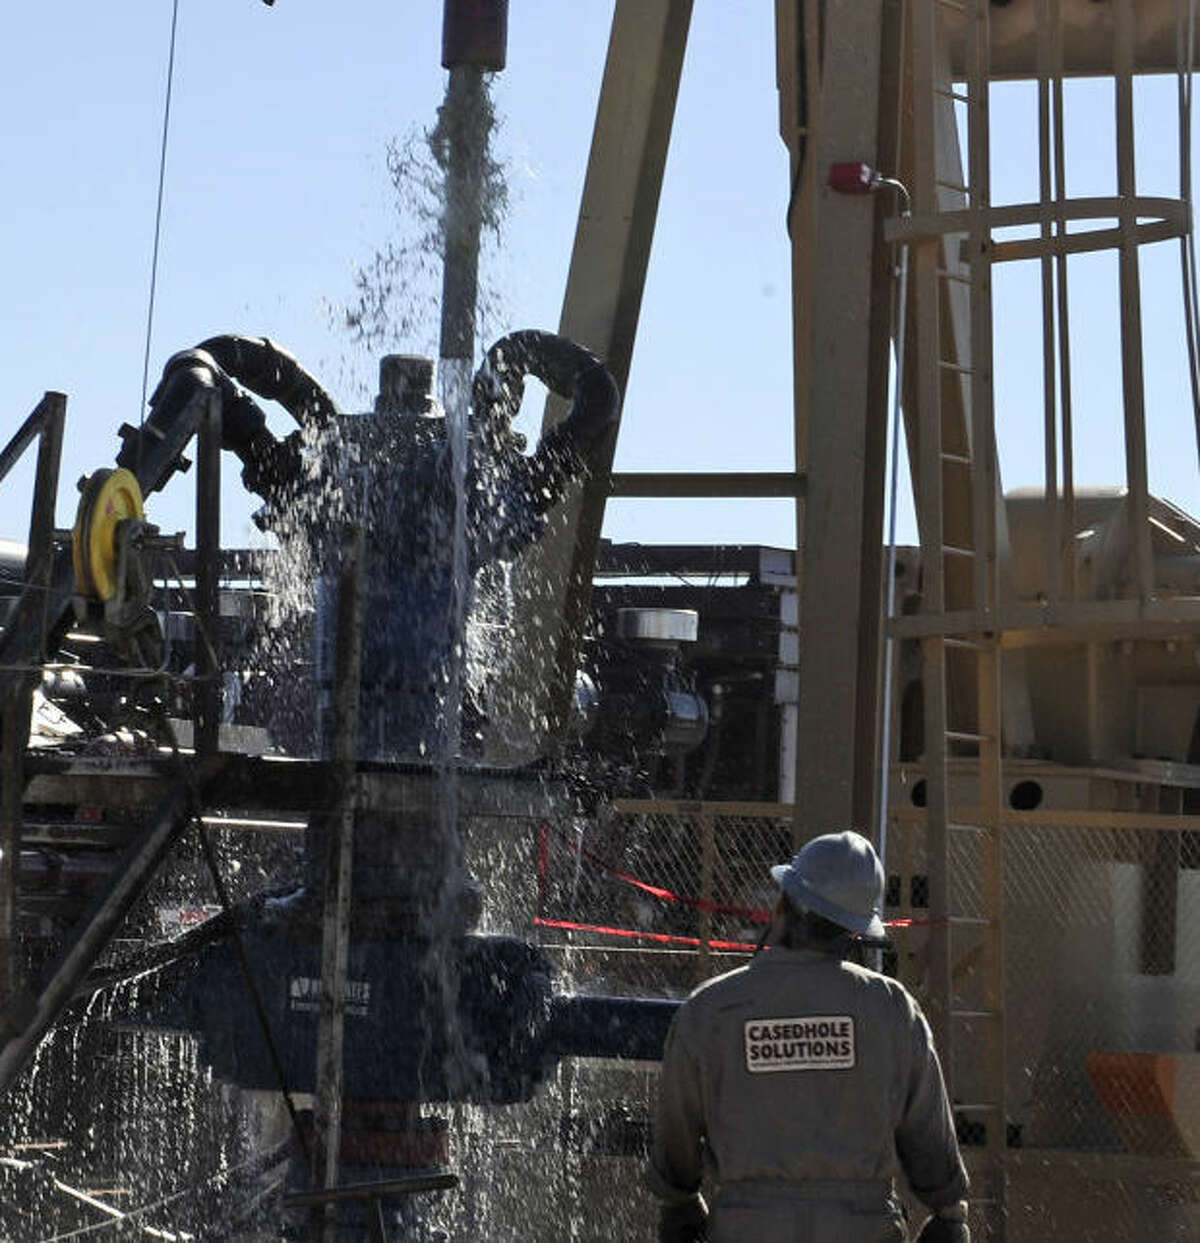 Water gushes out of a drilling pipe as it is pulled up to be replaced with a fresh pipe at a hydraulic fracturing site in Midland, Texas, Sept. 24, 2013. The drilling method known as fracturing uses huge amounts of high-pressure, chemical-laced water to free oil and natural gas trapped deep in underground rocks. With fresh water not as plentiful companies have been looking for ways to recycle their waste. (AP Photo/Pat Sullivan)  